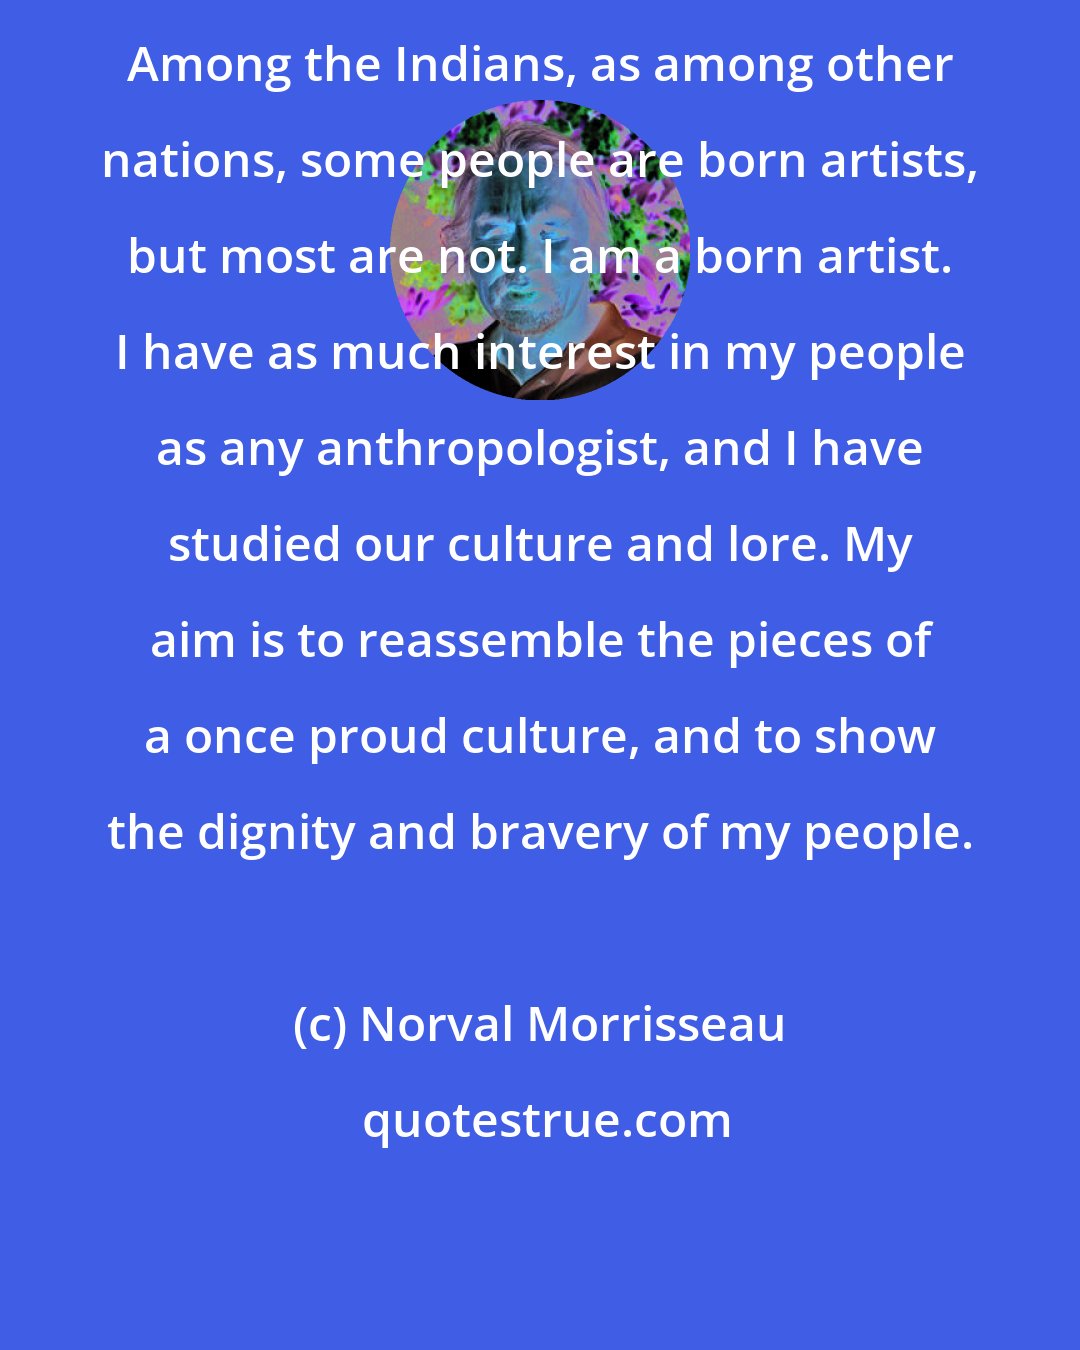 Norval Morrisseau: Among the Indians, as among other nations, some people are born artists, but most are not. I am a born artist. I have as much interest in my people as any anthropologist, and I have studied our culture and lore. My aim is to reassemble the pieces of a once proud culture, and to show the dignity and bravery of my people.